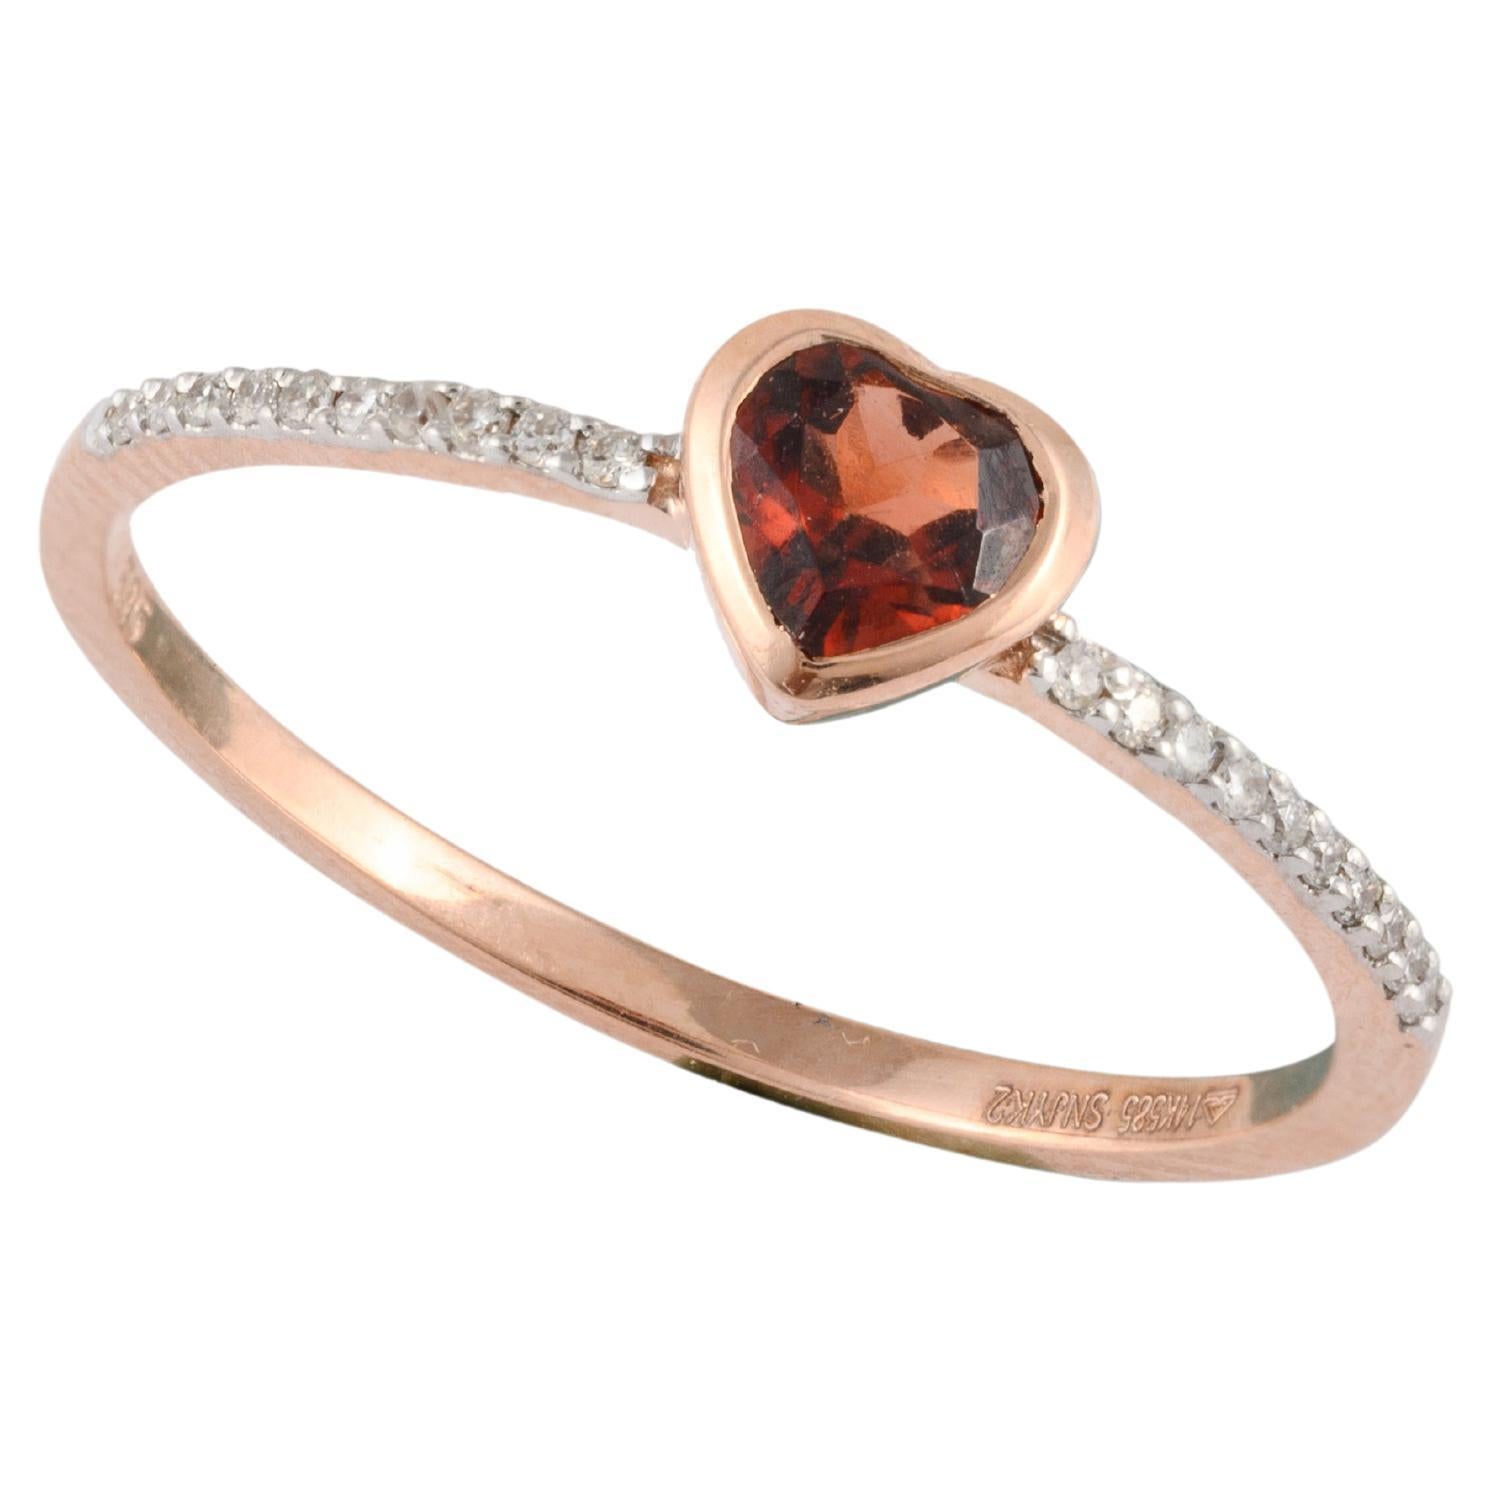 For Sale:  Dainty Heart Garnet and Diamond Engagement Ring in 18 Karat Solid Rose Gold